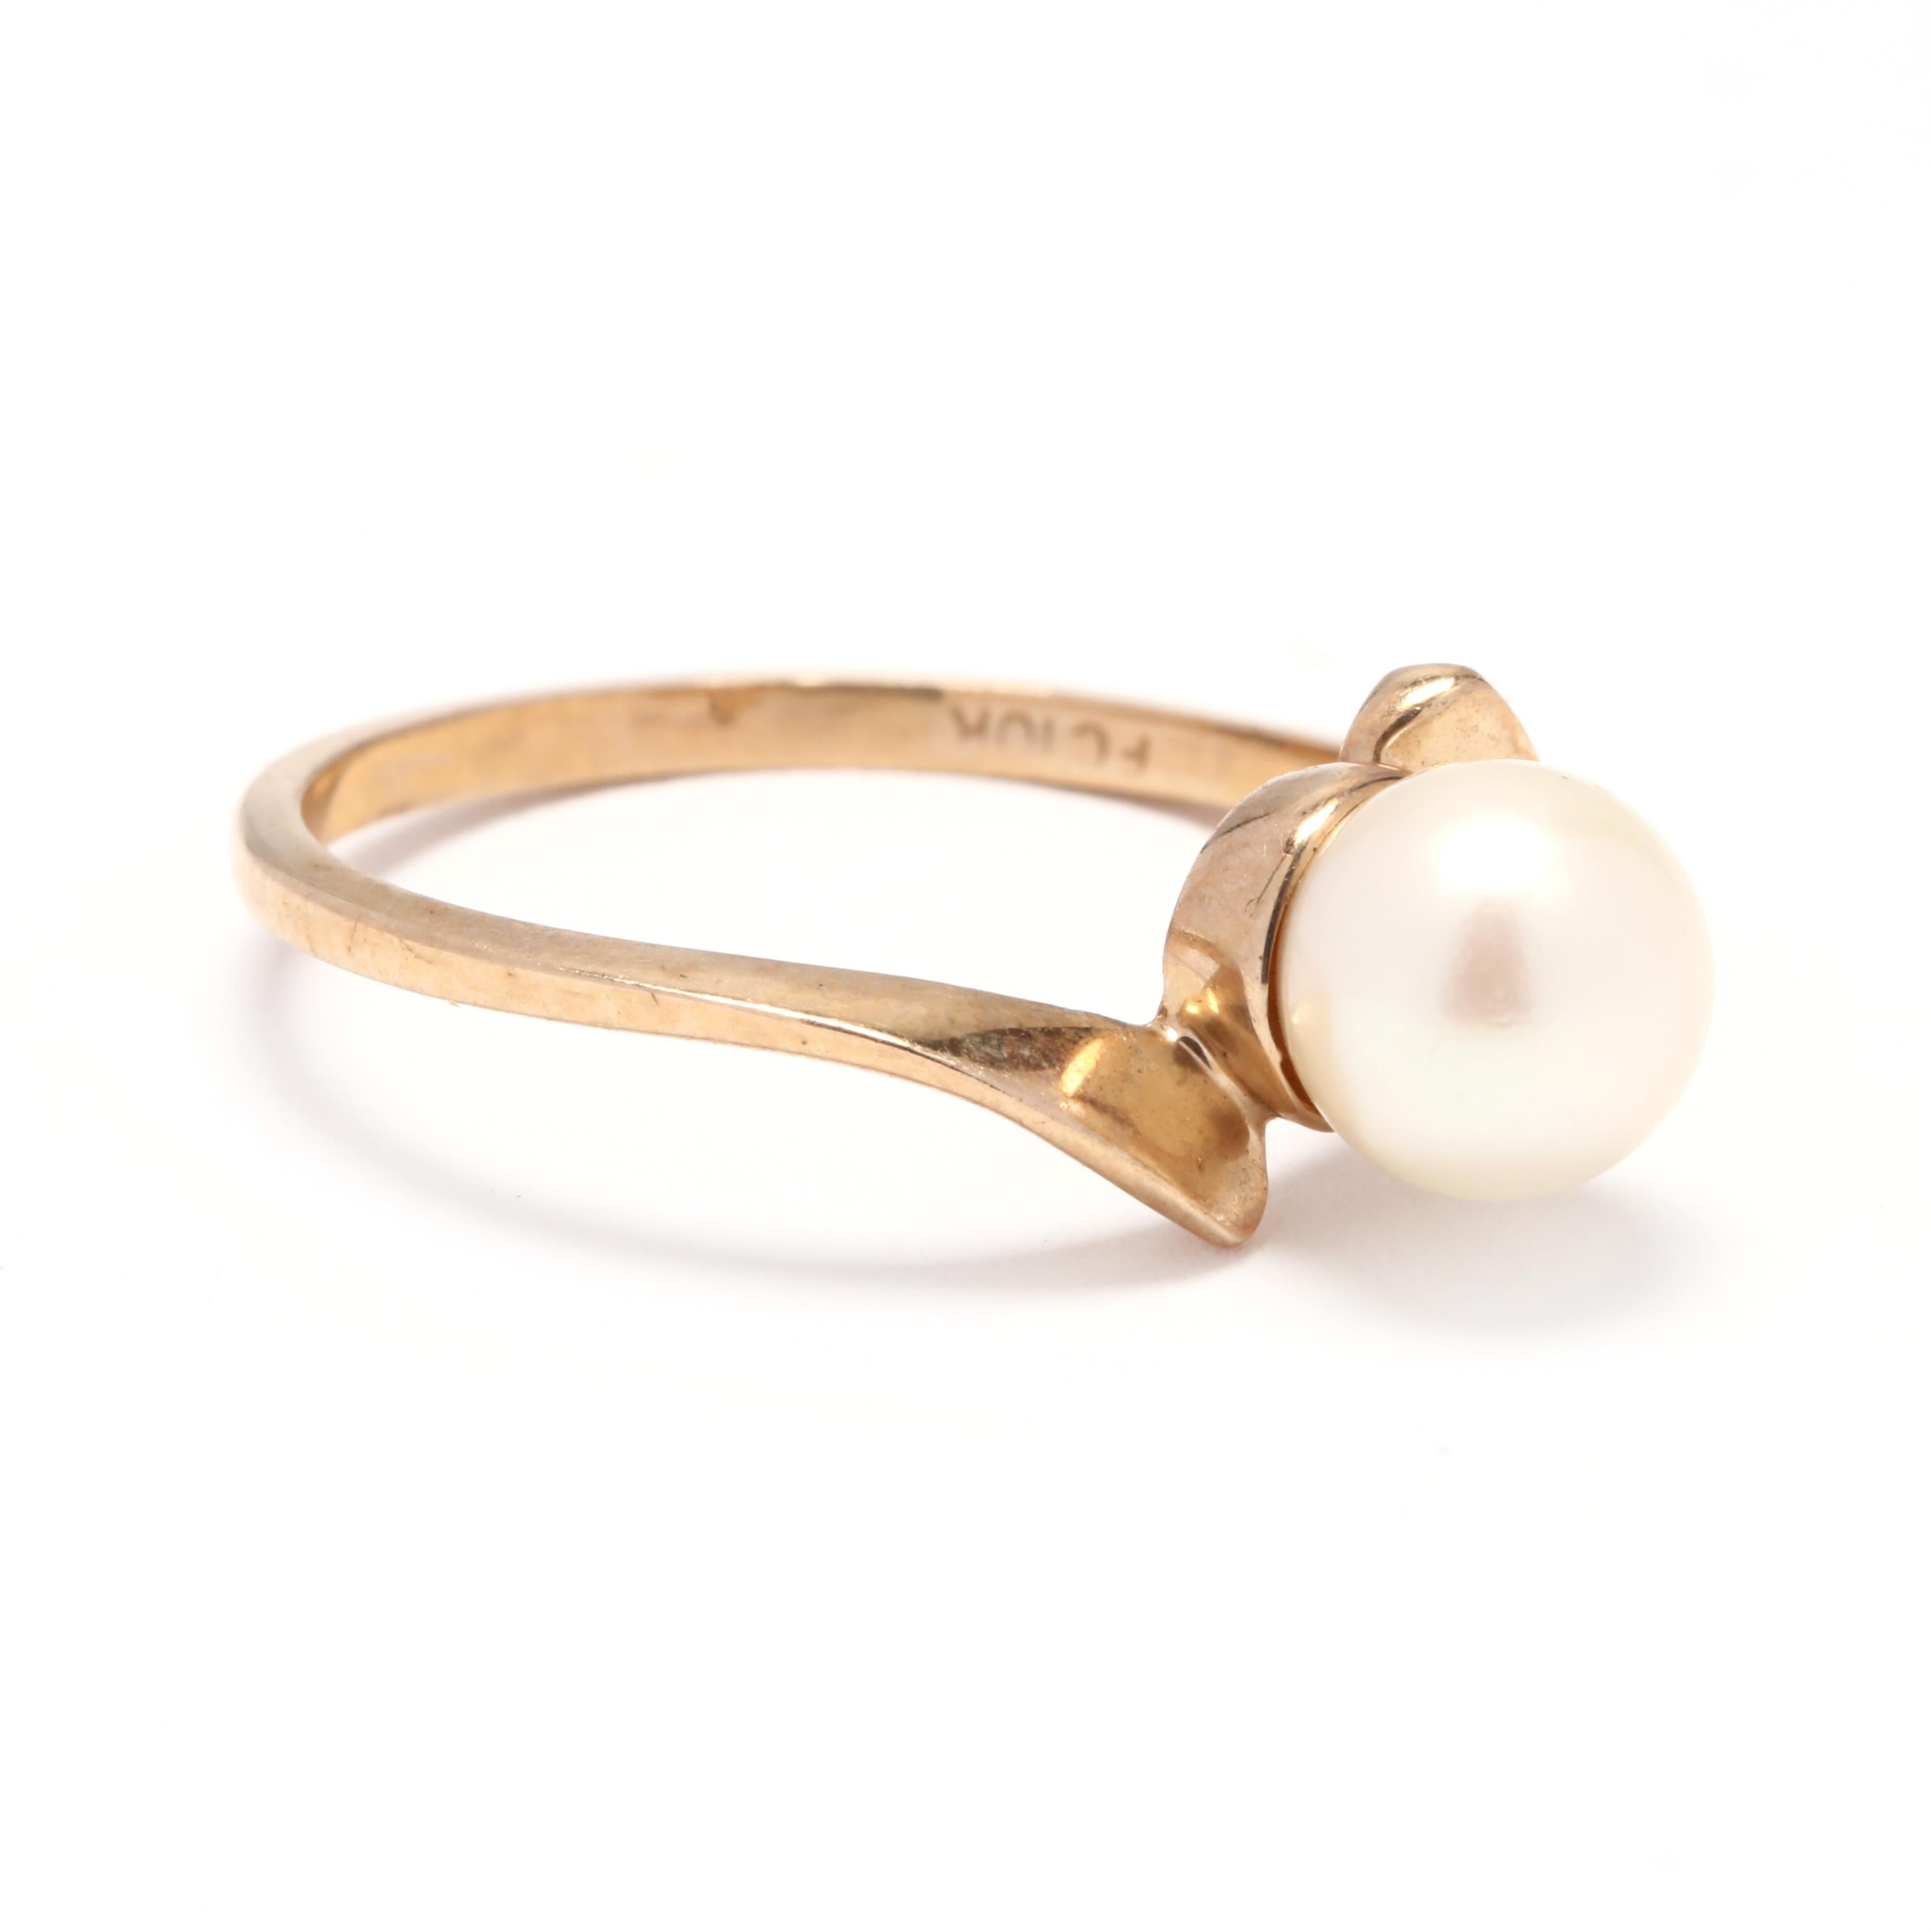 A 10 karat yellow gold and pearl bypass solitaire ring. This ring features a 6.8mm white pearl set in a thin, bypass mounting.

Stones:
- pearl
- round bead, 1 stone
- 6.8 mm

Ring Size 6.75

1.35 dwts.

* Please note that this is a vintage item and